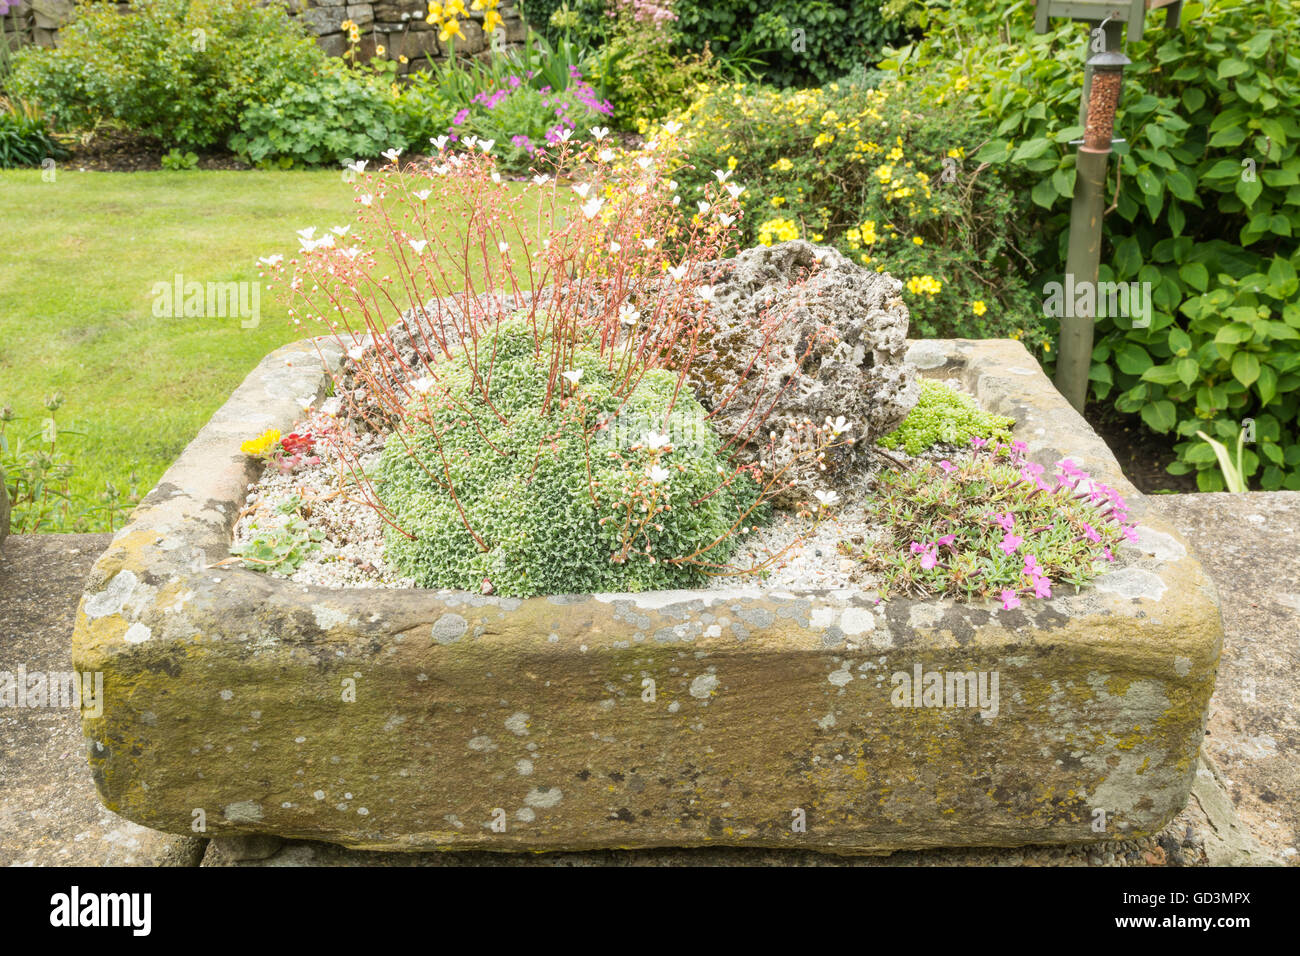 Alpines in a stone sink Stock Photo